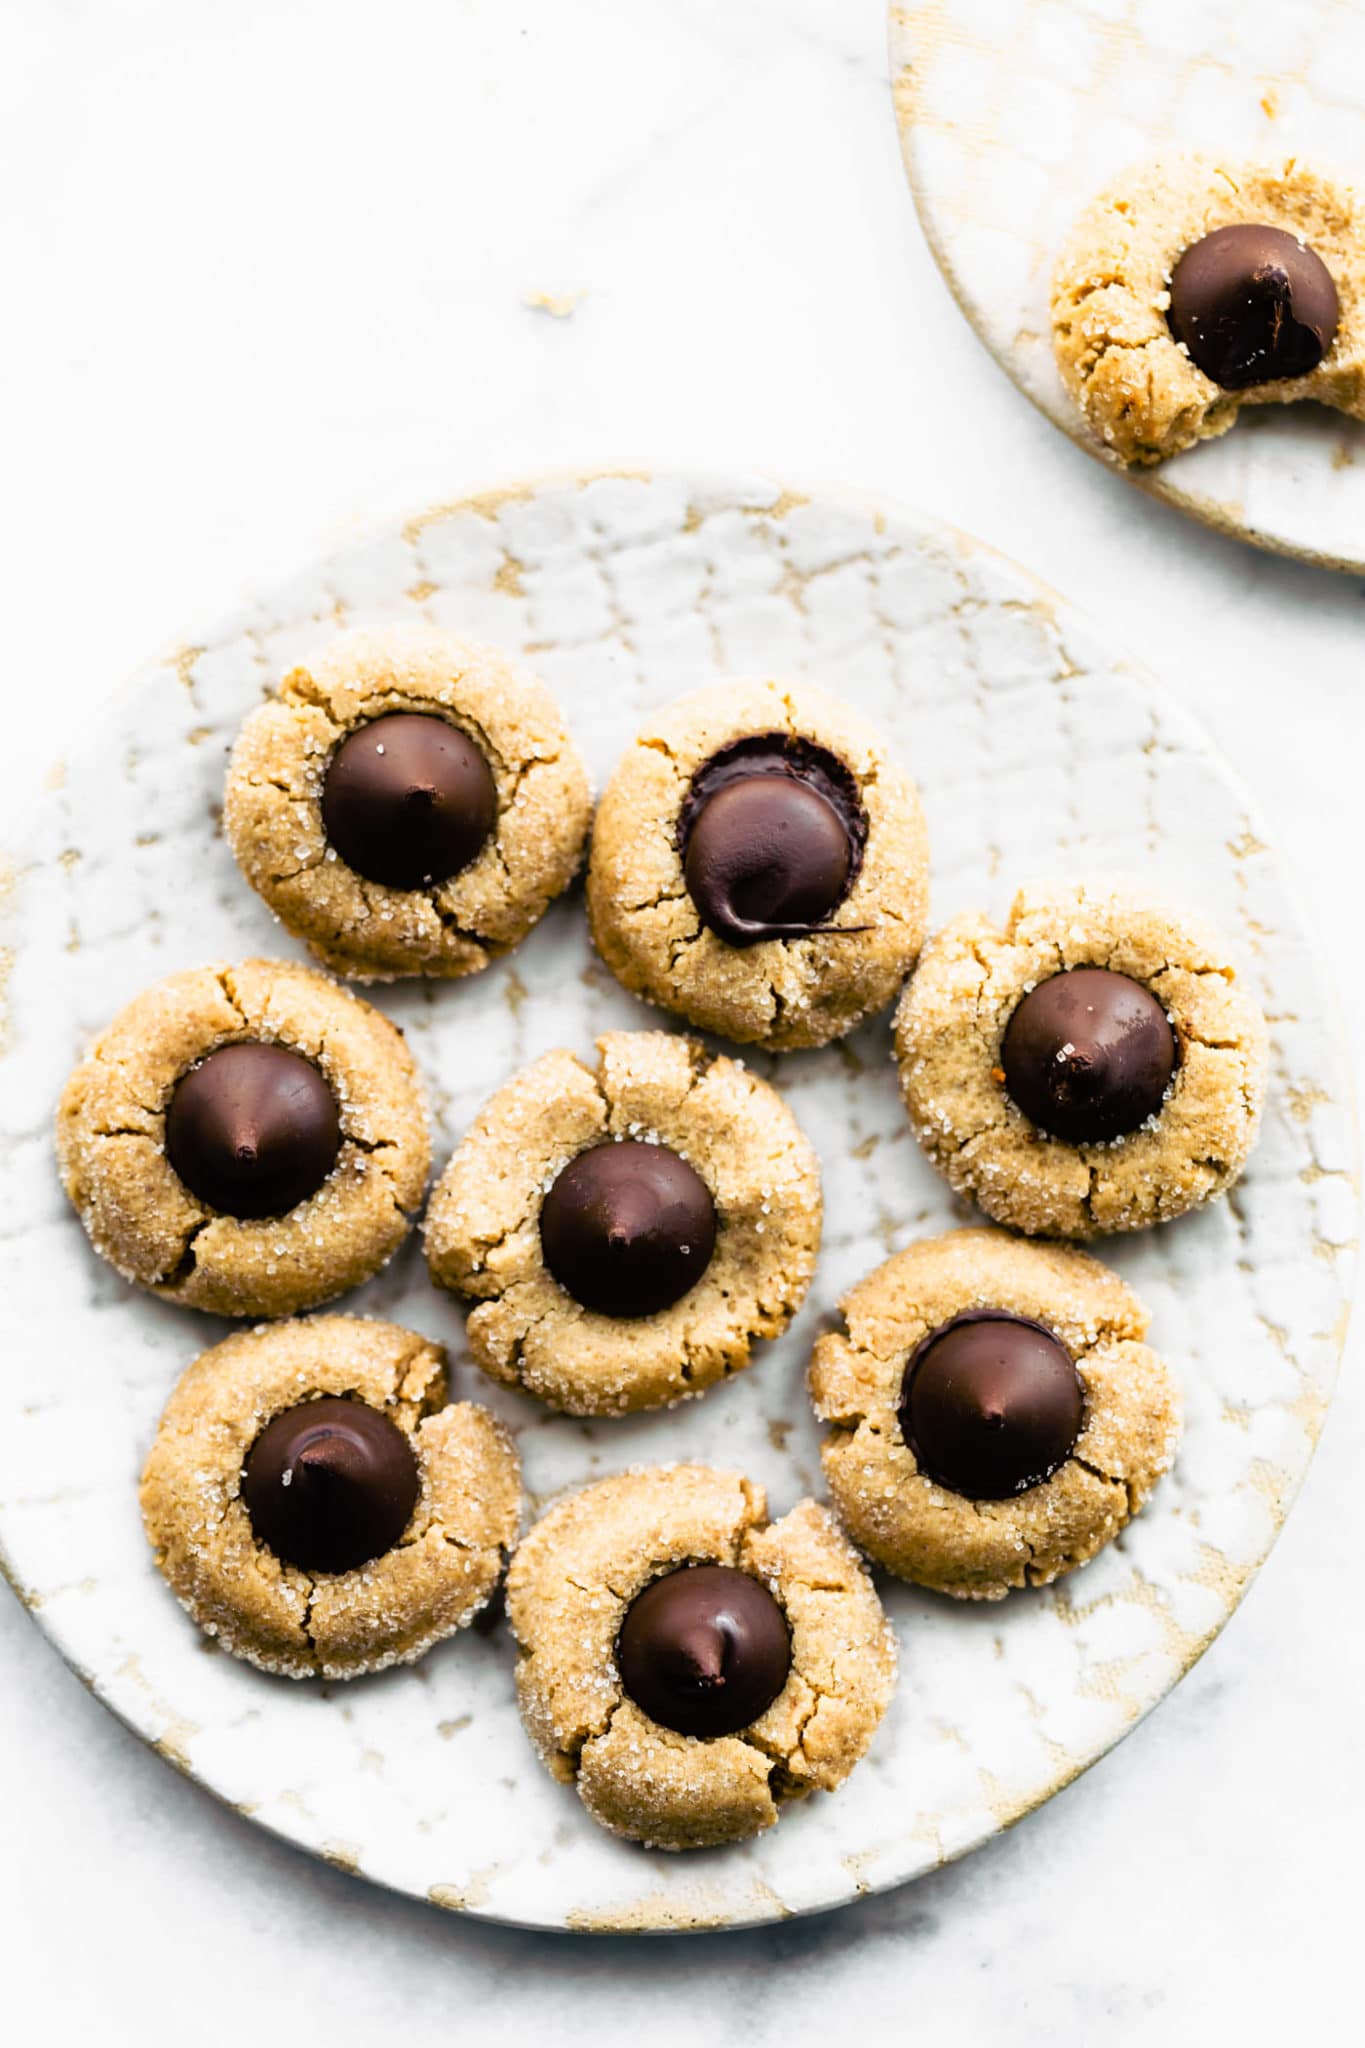 Gluten free peanut butter blossom cookies on a plate